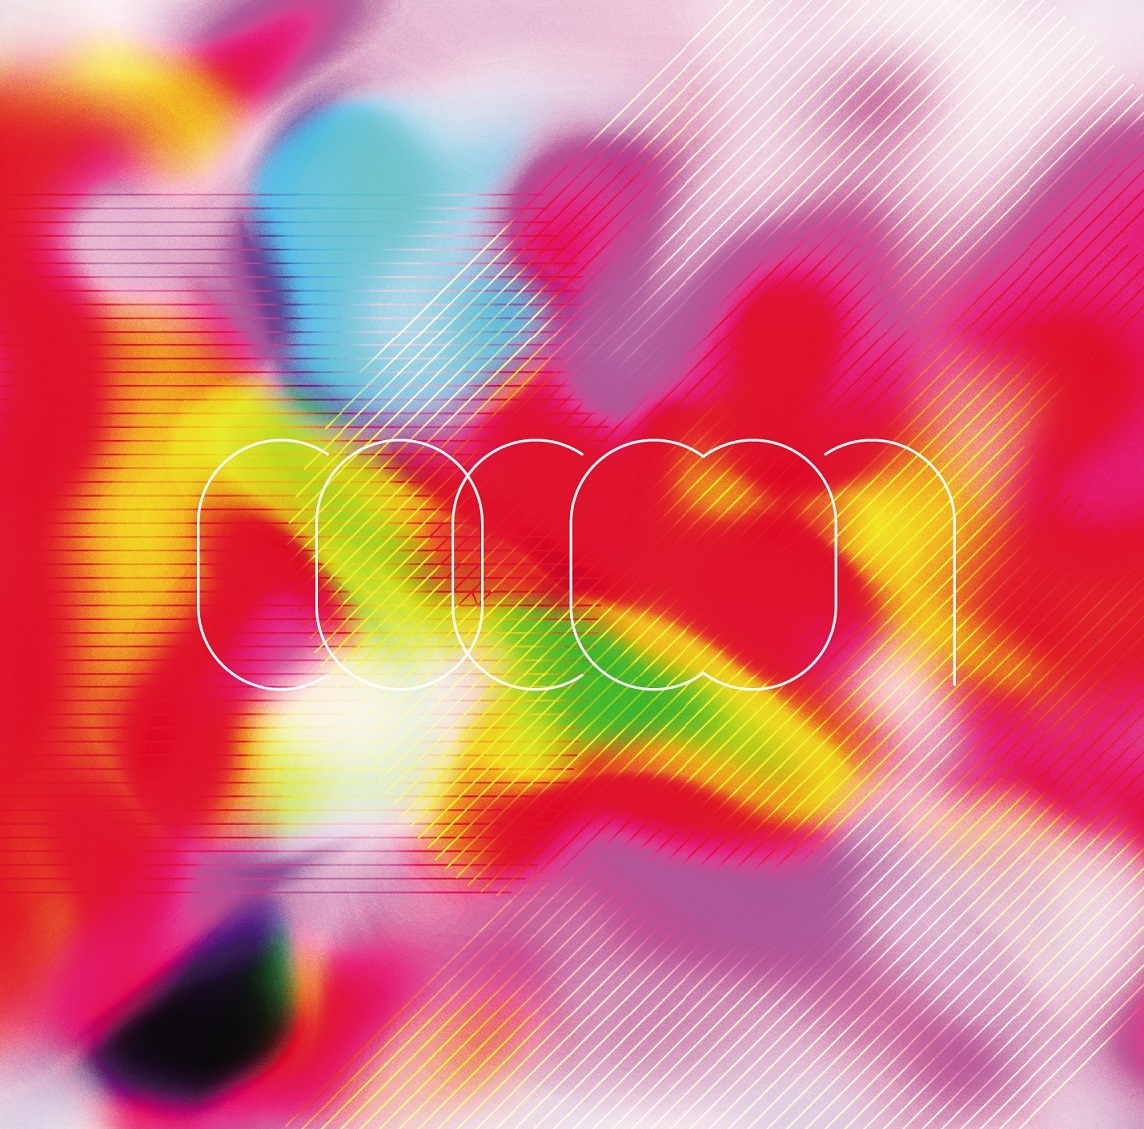 androp『cocoon』通常盤